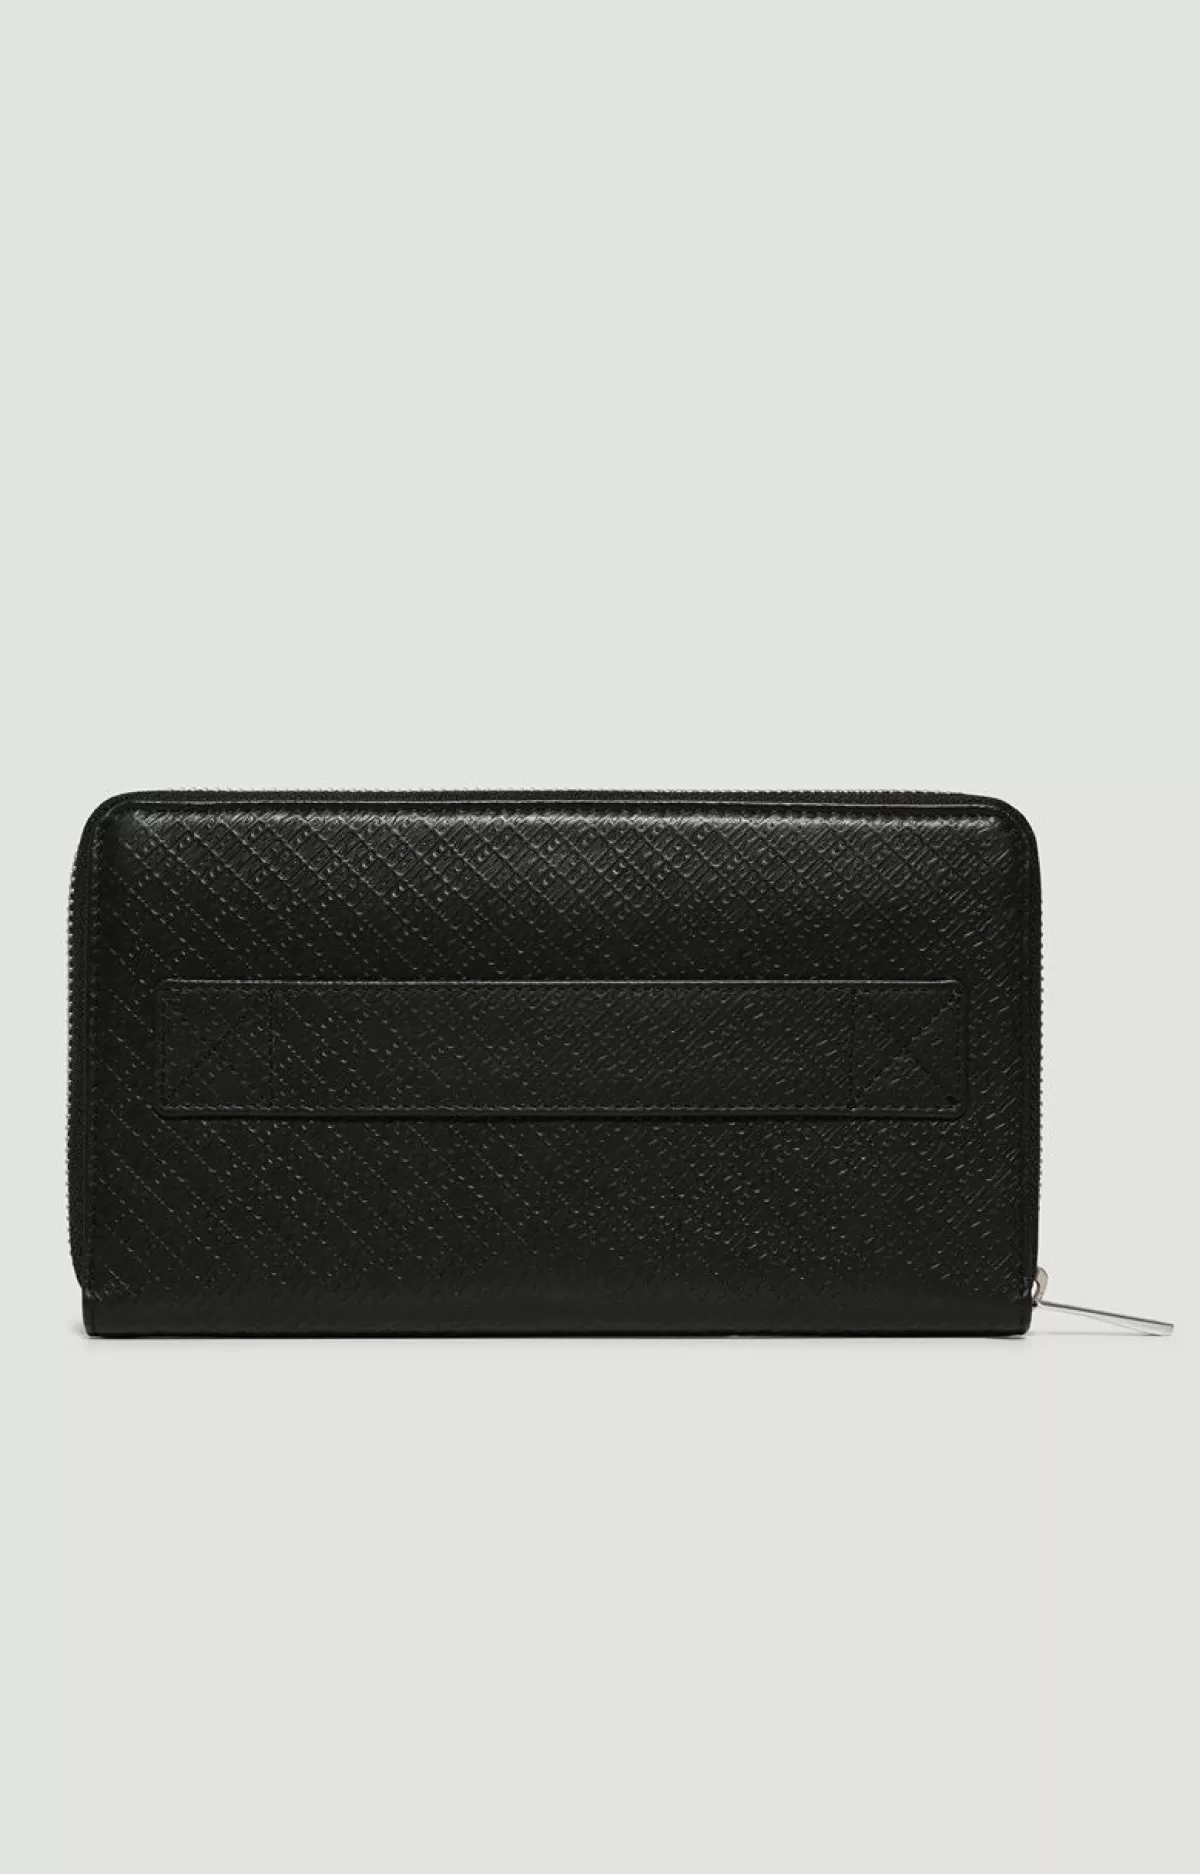 Bikkembergs Men'S Leather Clutch With All-Over Pattern - Asher Black Best